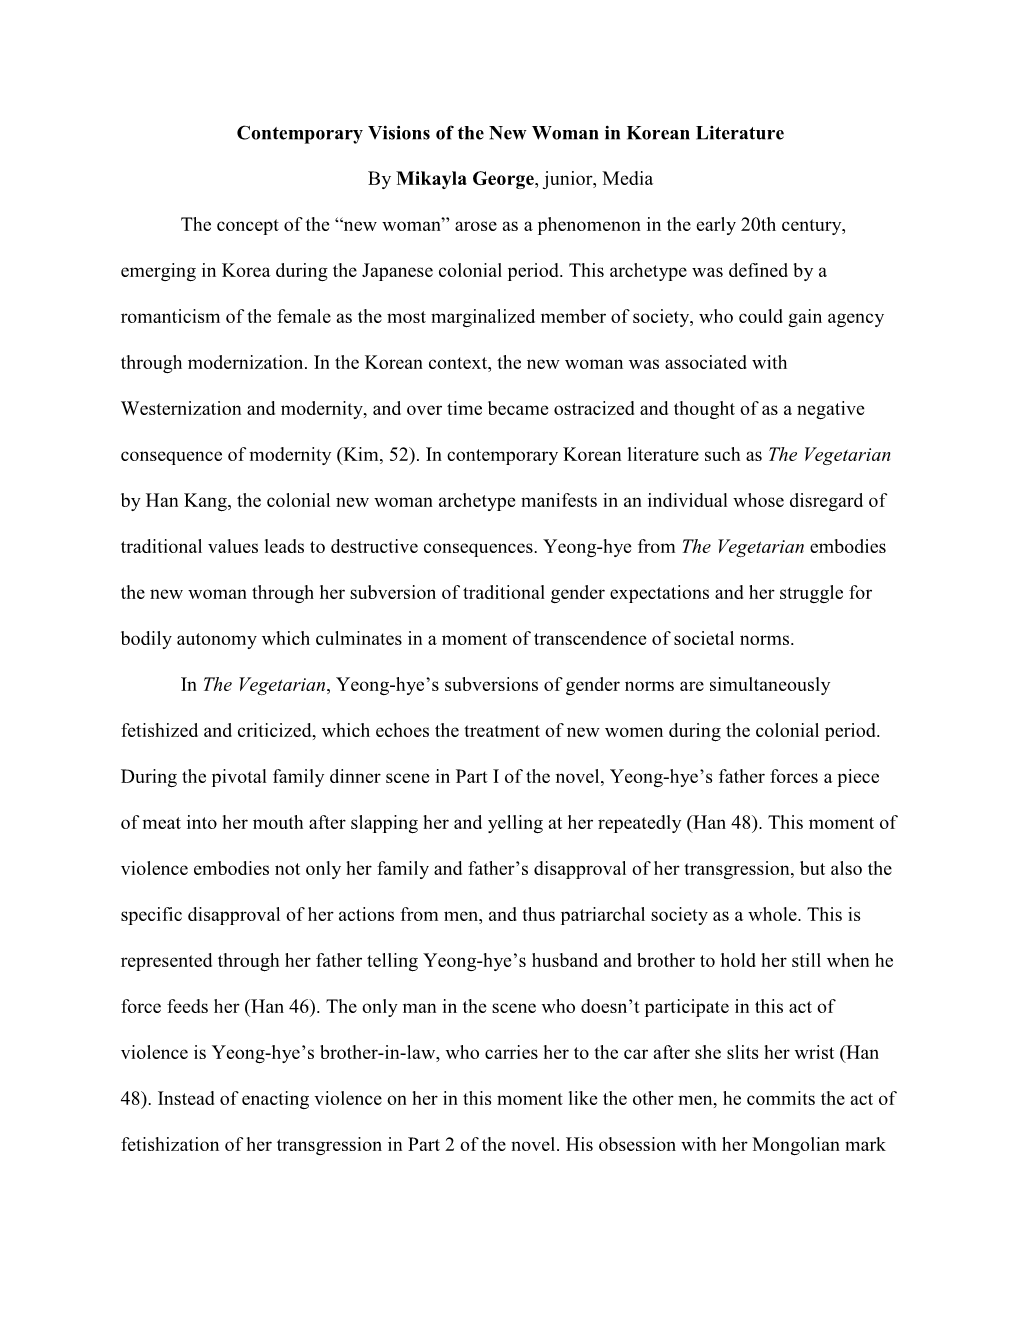 Contemporary Visions of the New Woman in Korean Literature by Mikayla George, Junior, Media the Concept Of